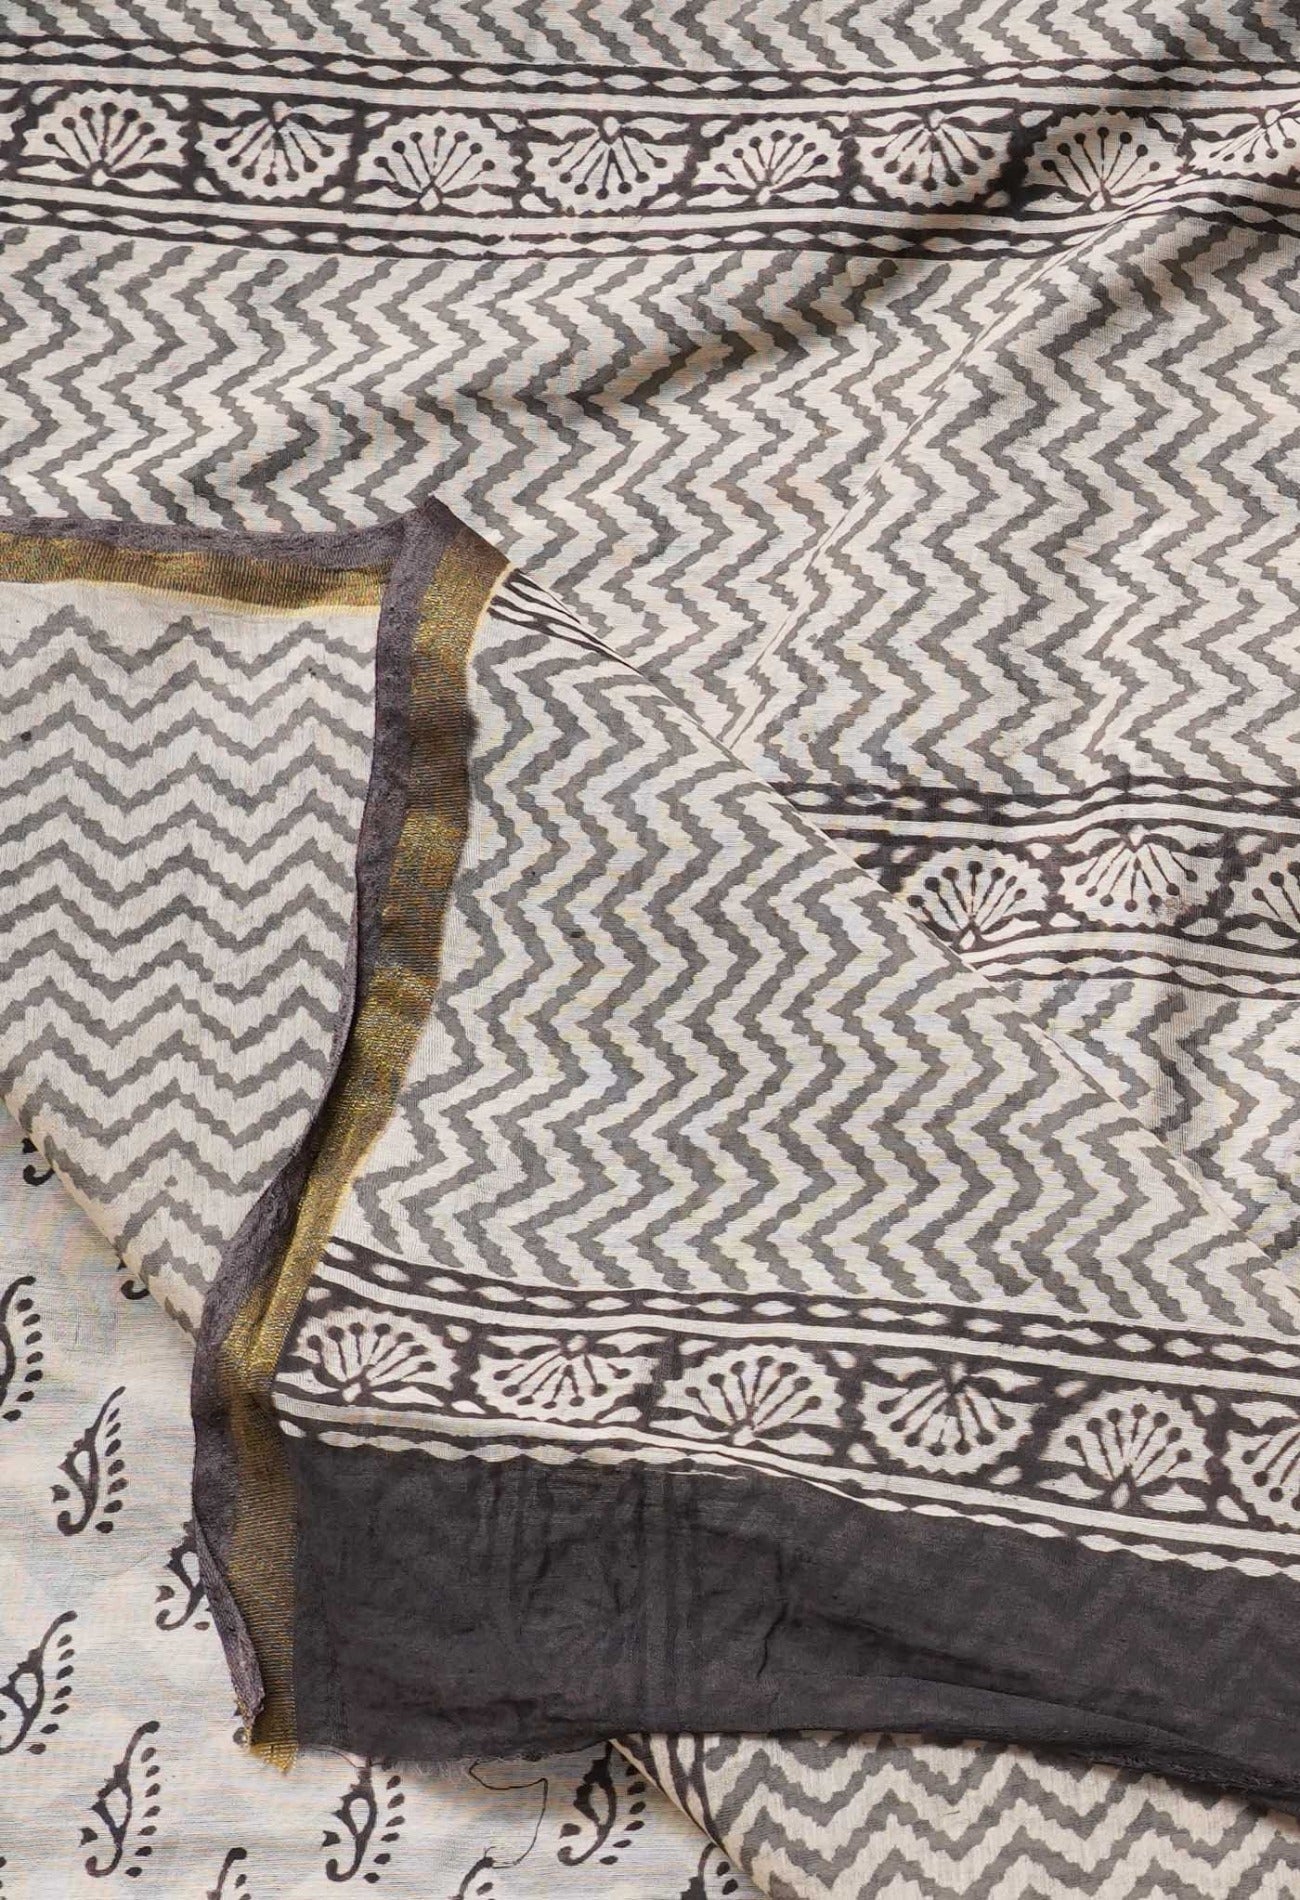 Online Shopping for Black-White Pure Chanderi Sico Saree with Bagru from Rajasthan at Unnatisilks.com India
